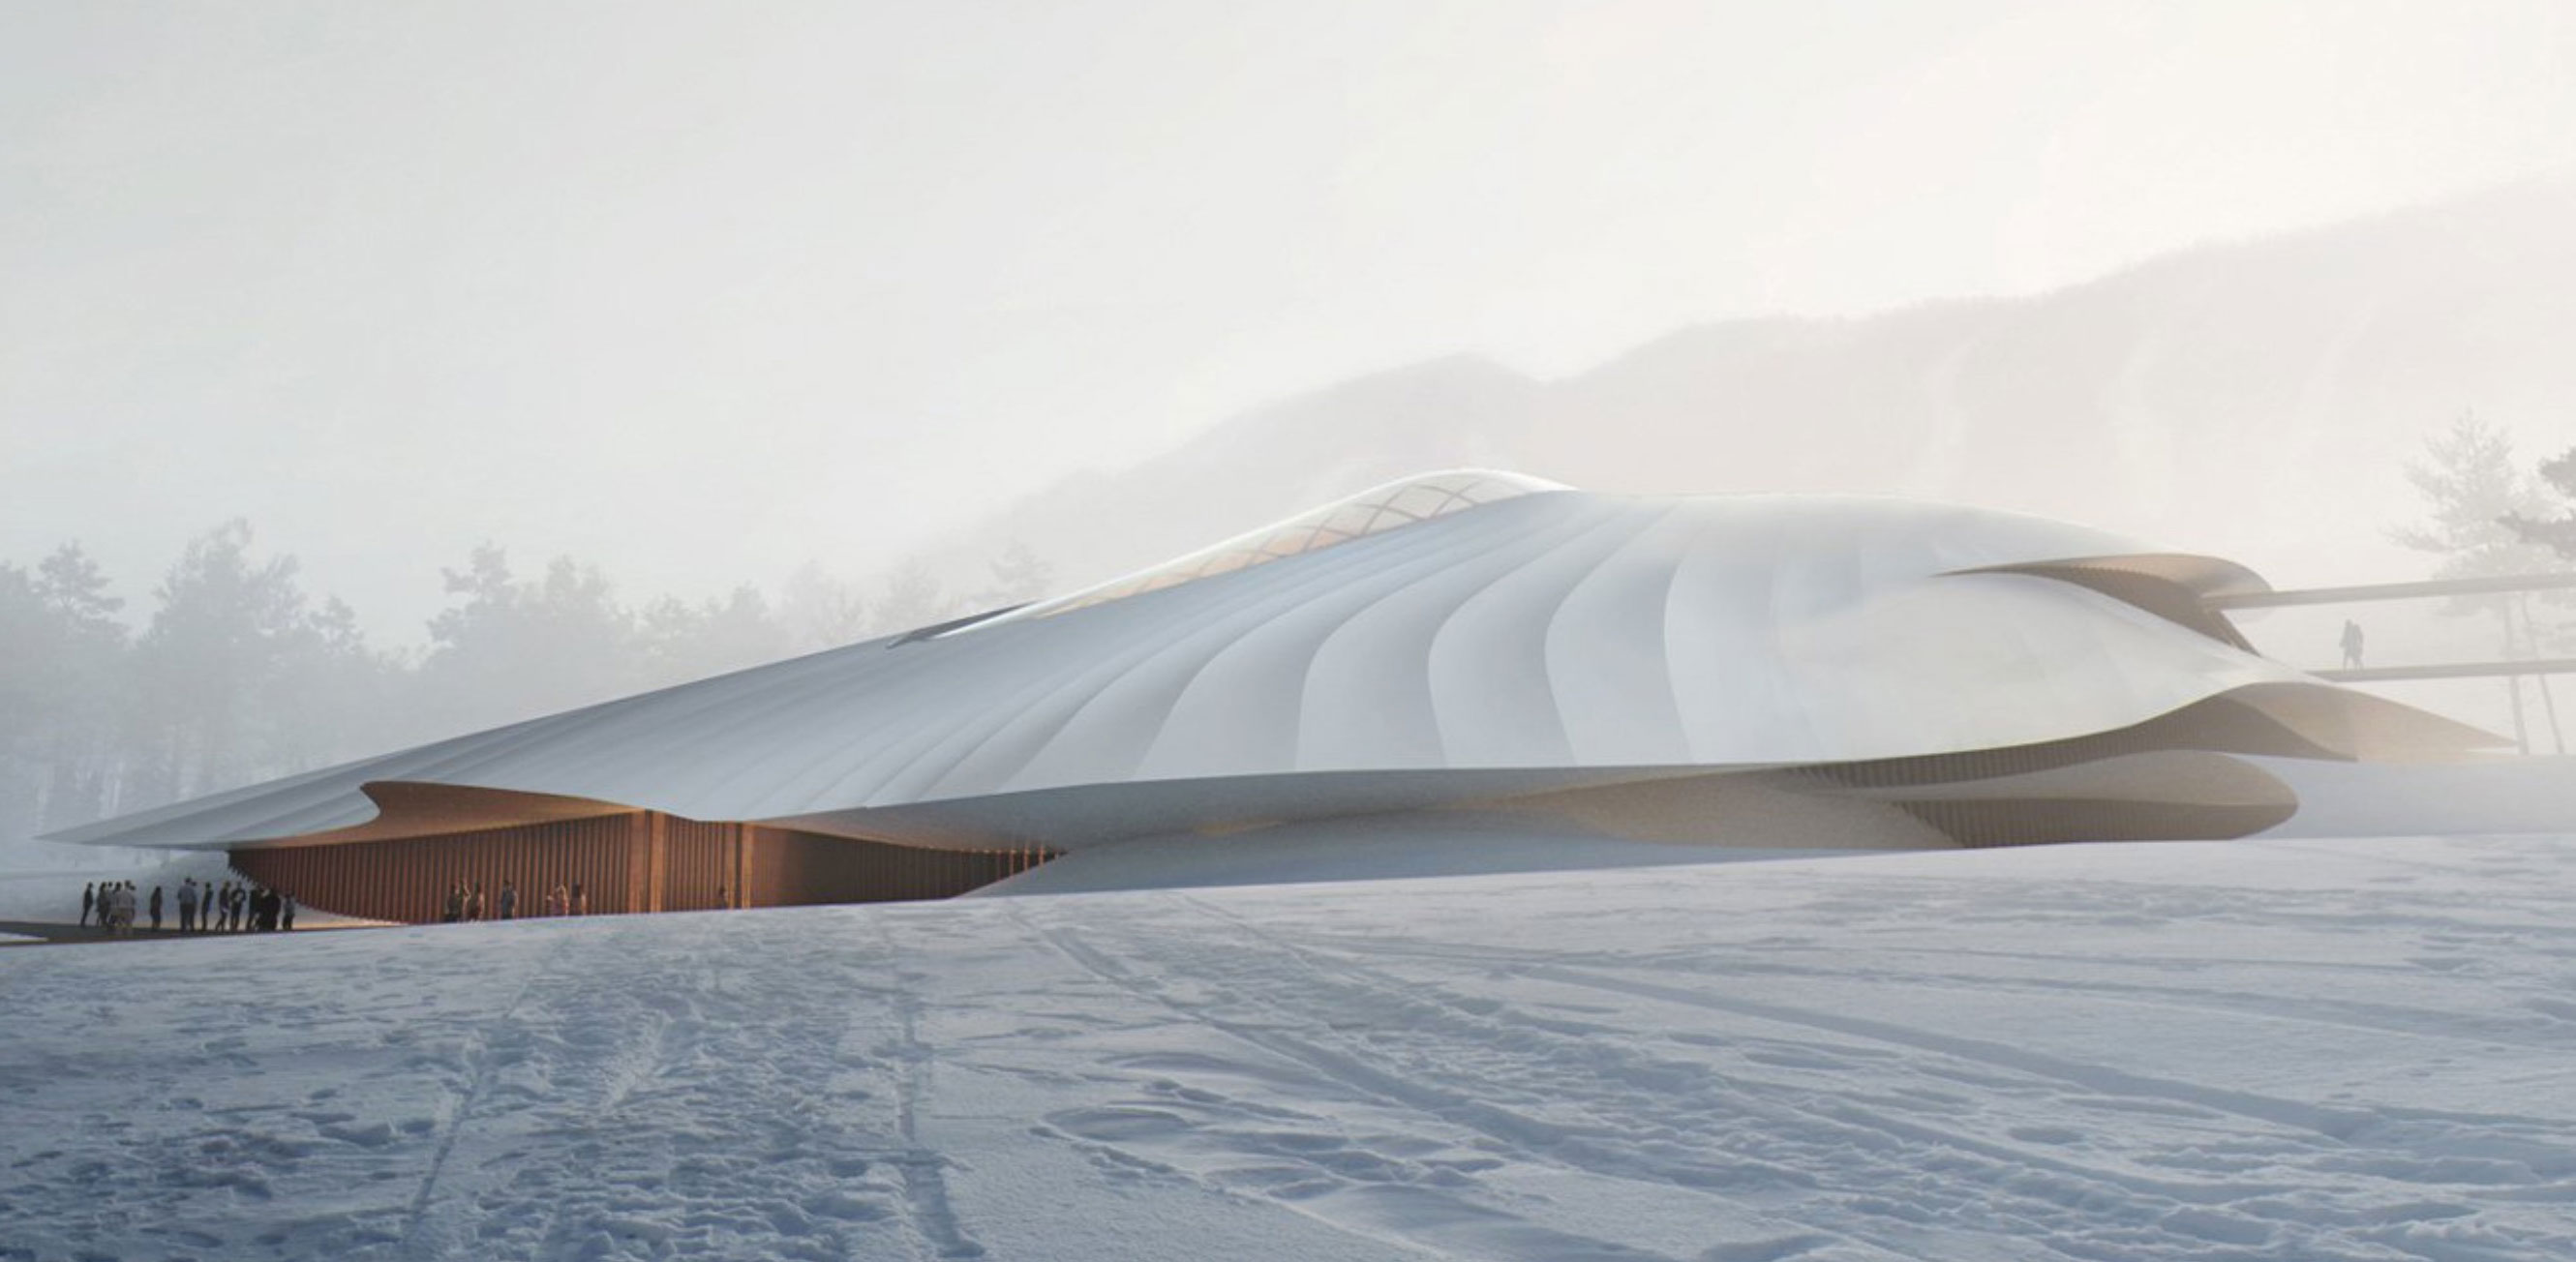 The Yabuli Conference Centre by MAD Architects. All renderings courtesy of MAD